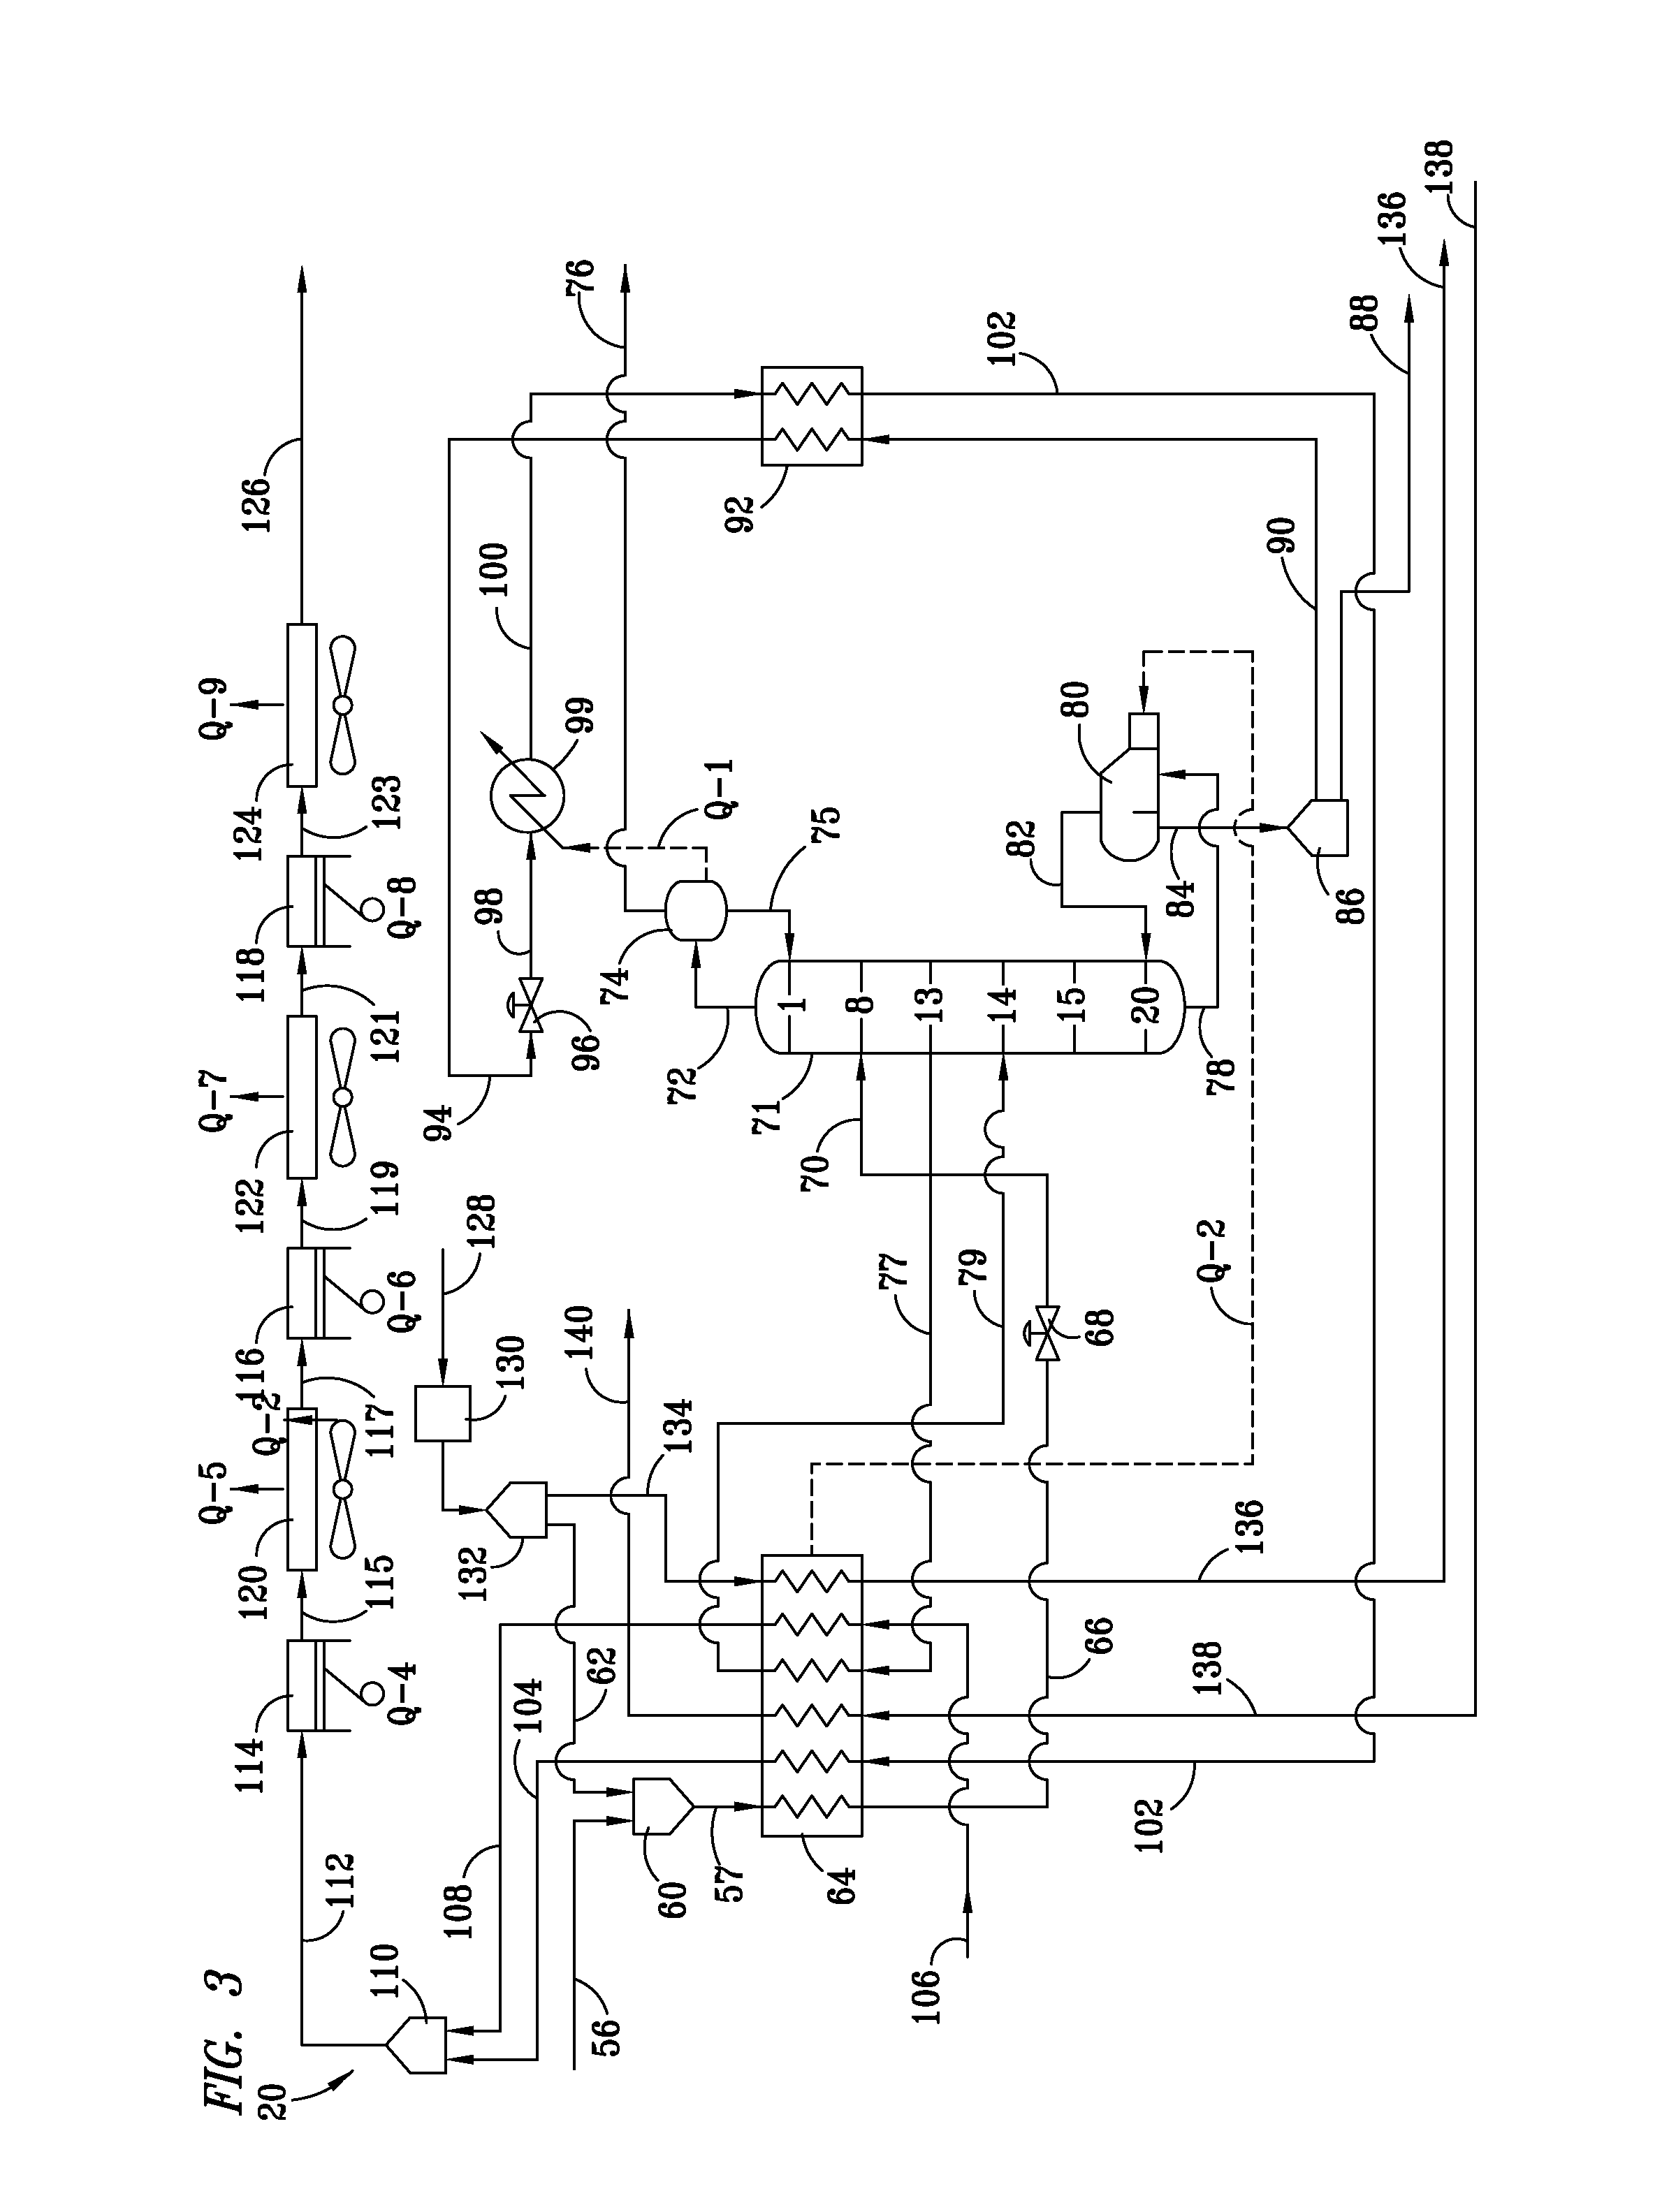 System and method for producing LNG from contaminated gas streams